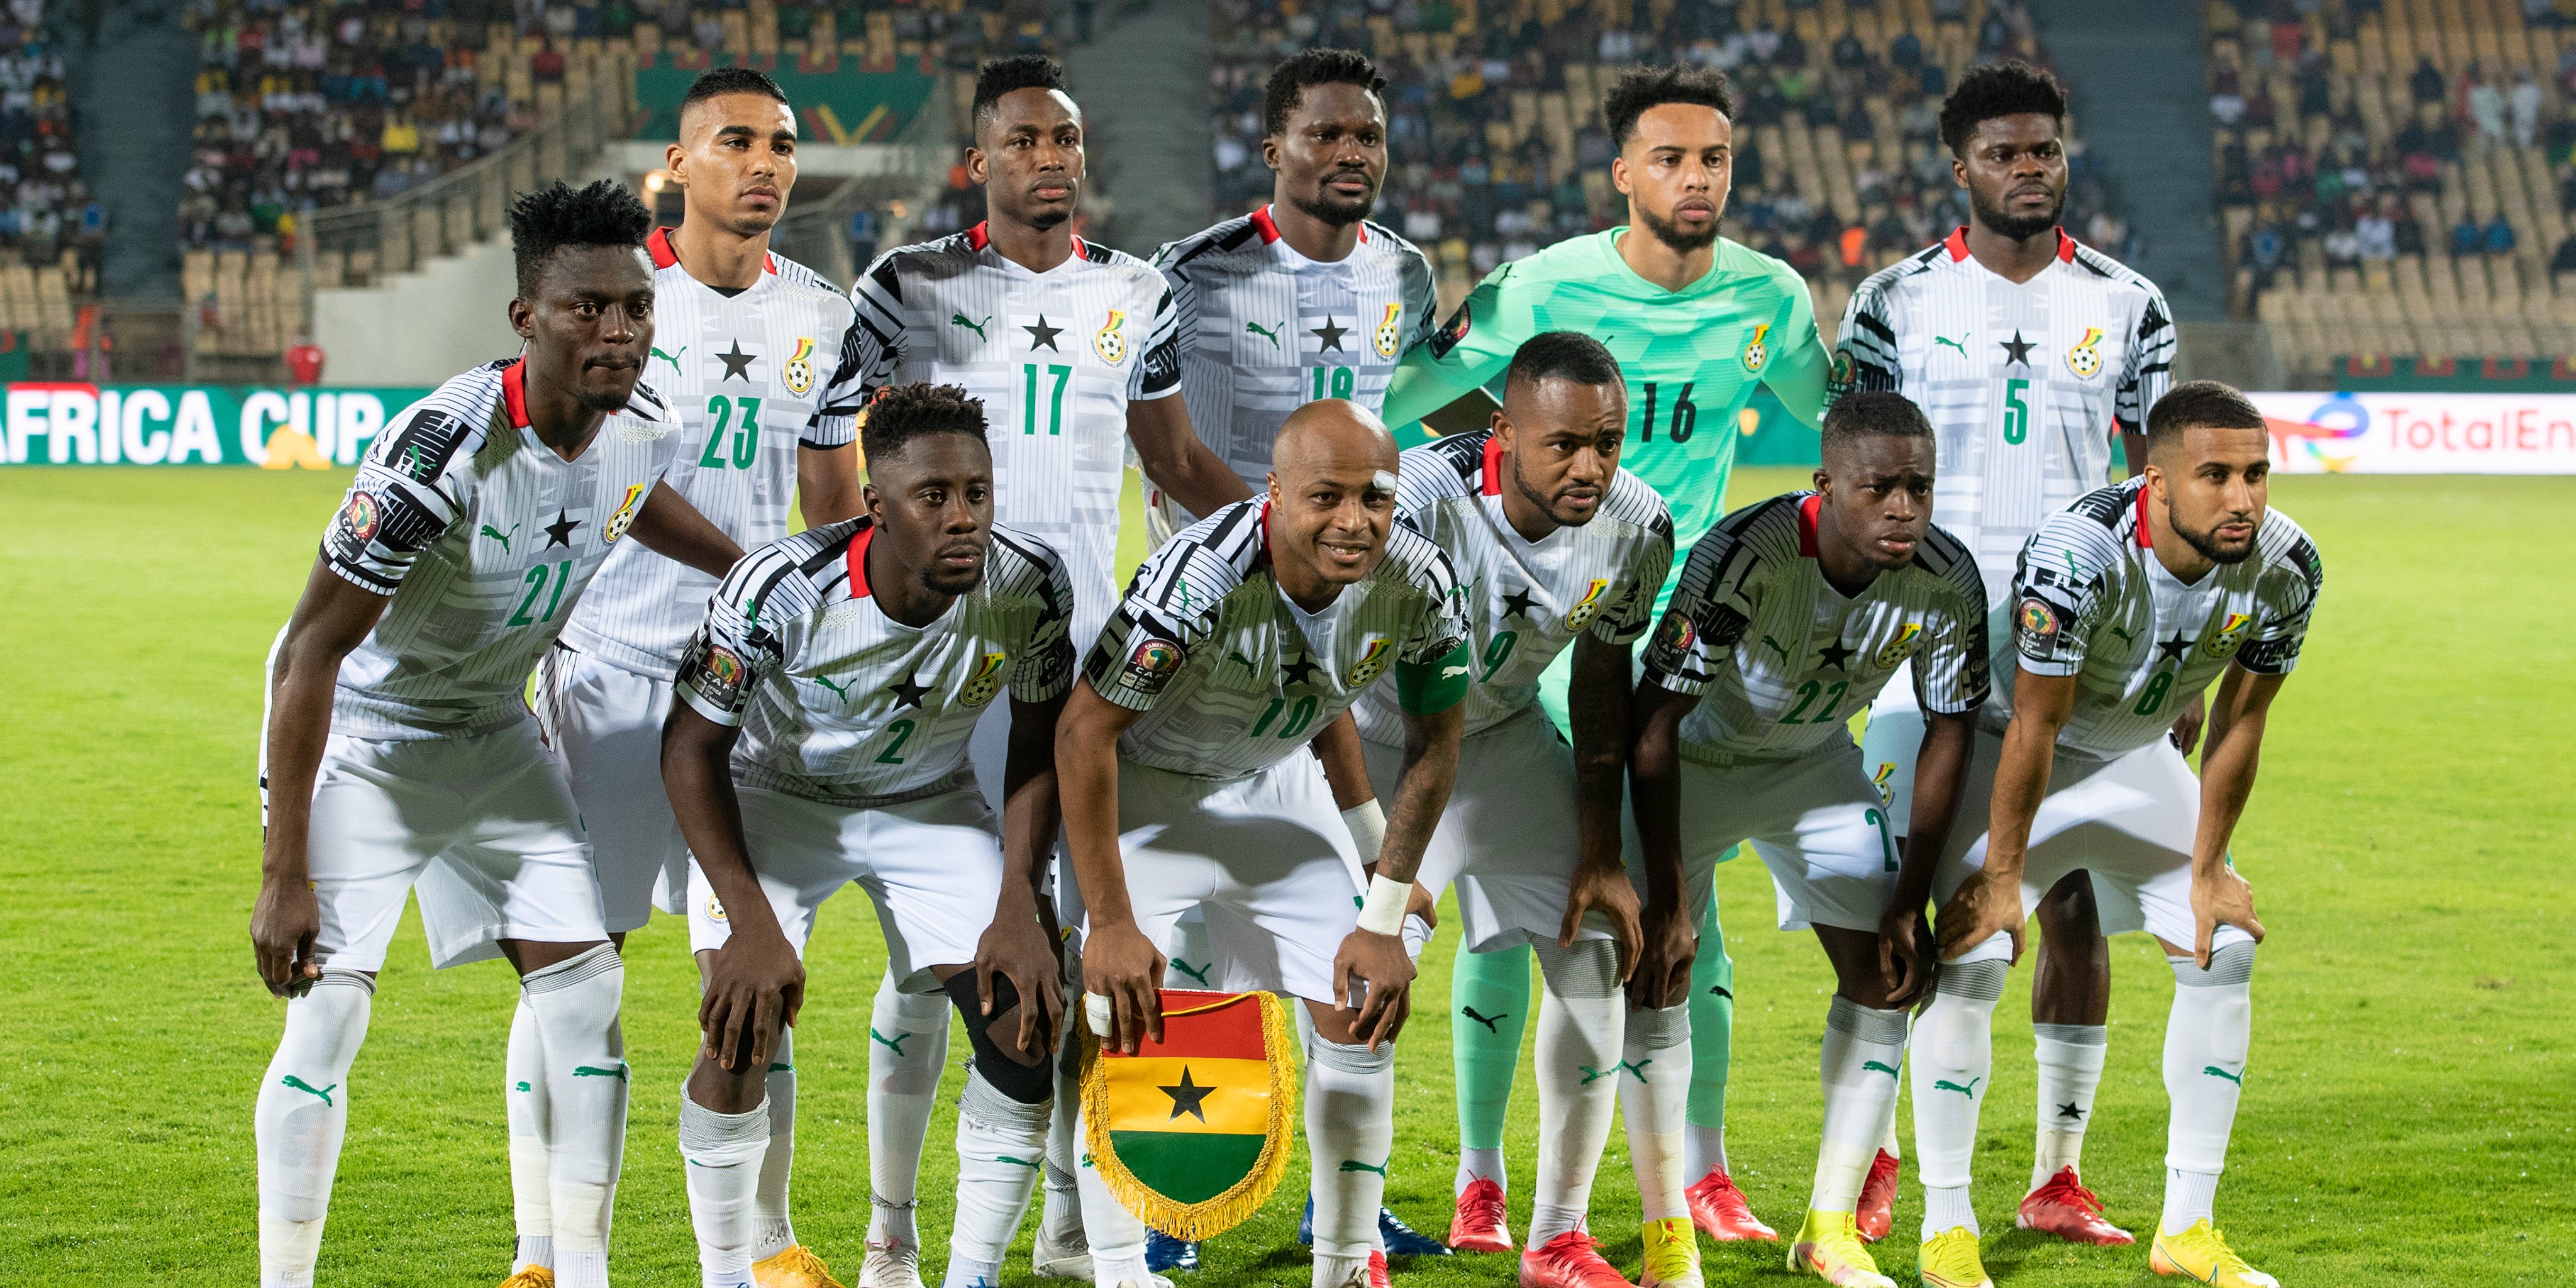 Gabon vs. Ghana - Group C: African Cup of Nations 2021